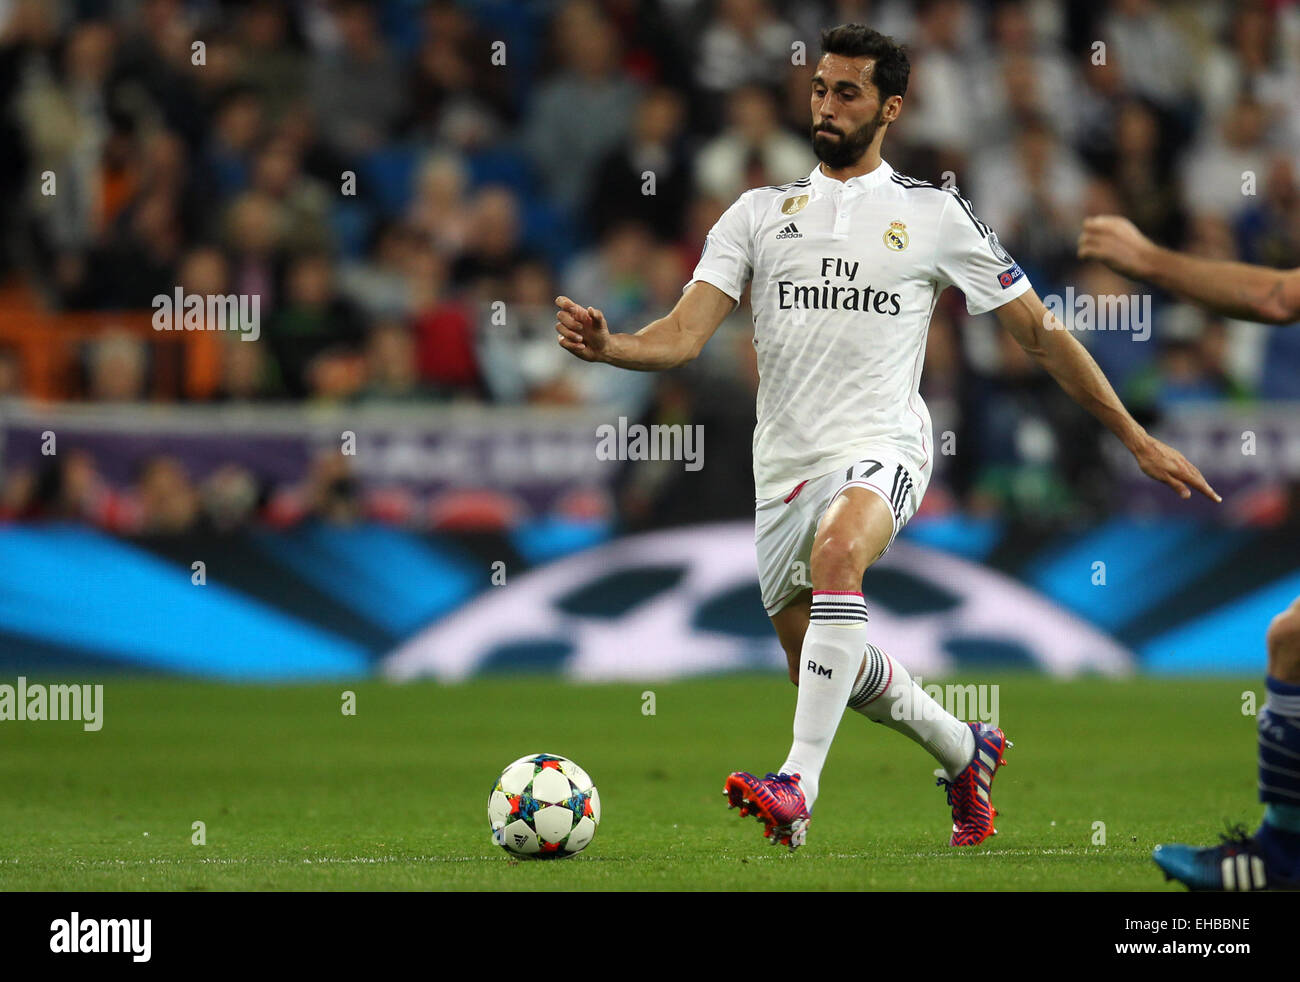 Madrid, Spain. 10th Mar, 2015. Real Madrid's Alvaro Arbeloa kicks a ball during the UEFA Champions League Round of 16 second leg soccer match at Santiago Bernabeu Stadium in Madrid, Spain, 10 March 2015. Photo: Ina Fassbender/dpa/Alamy Live News Stock Photo